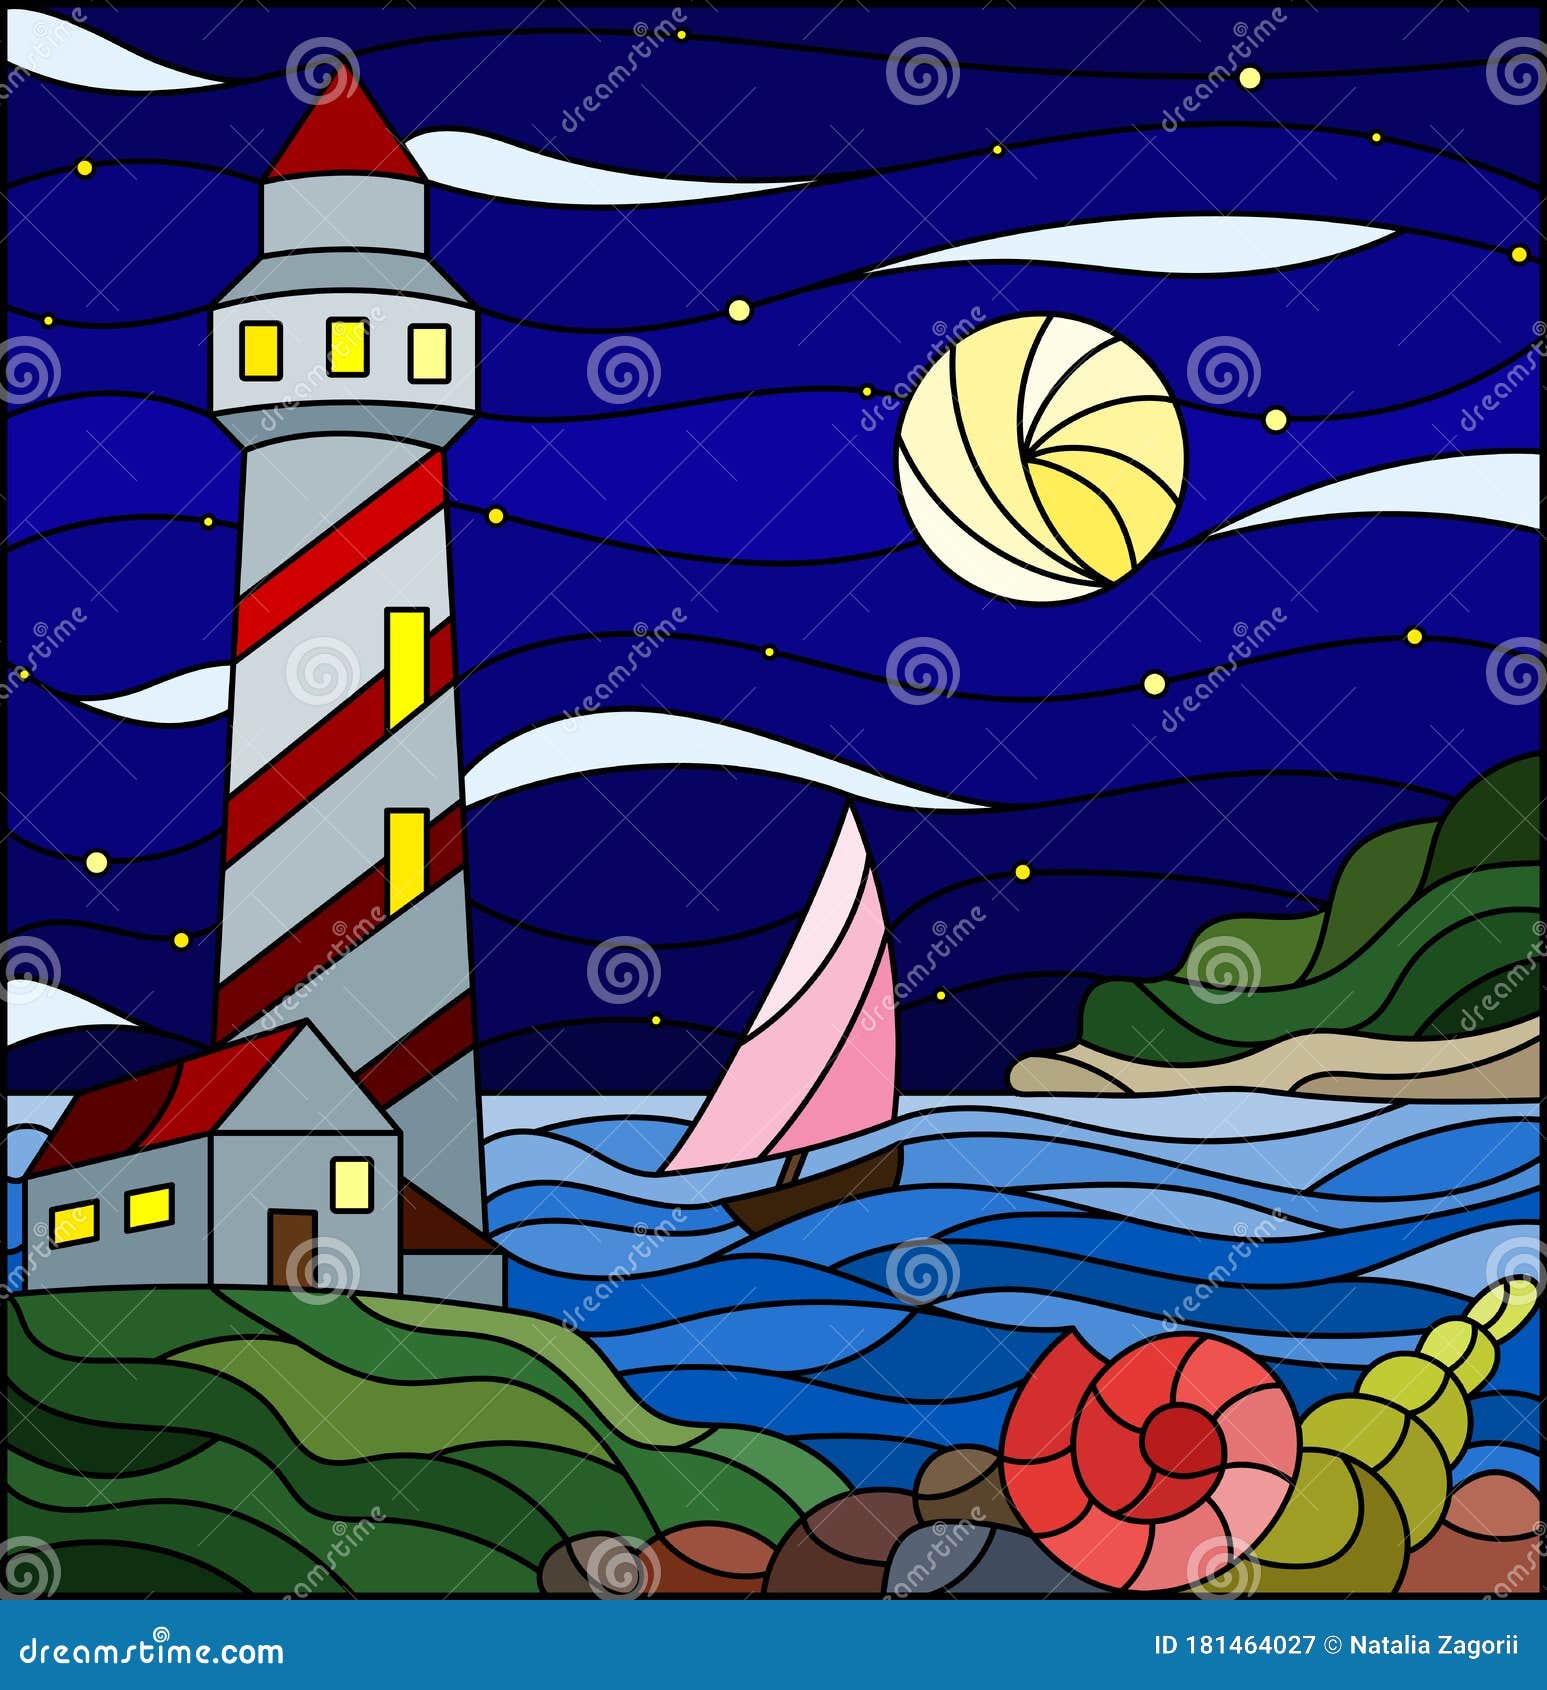 Fused Glass Lighthouse with Sailboats